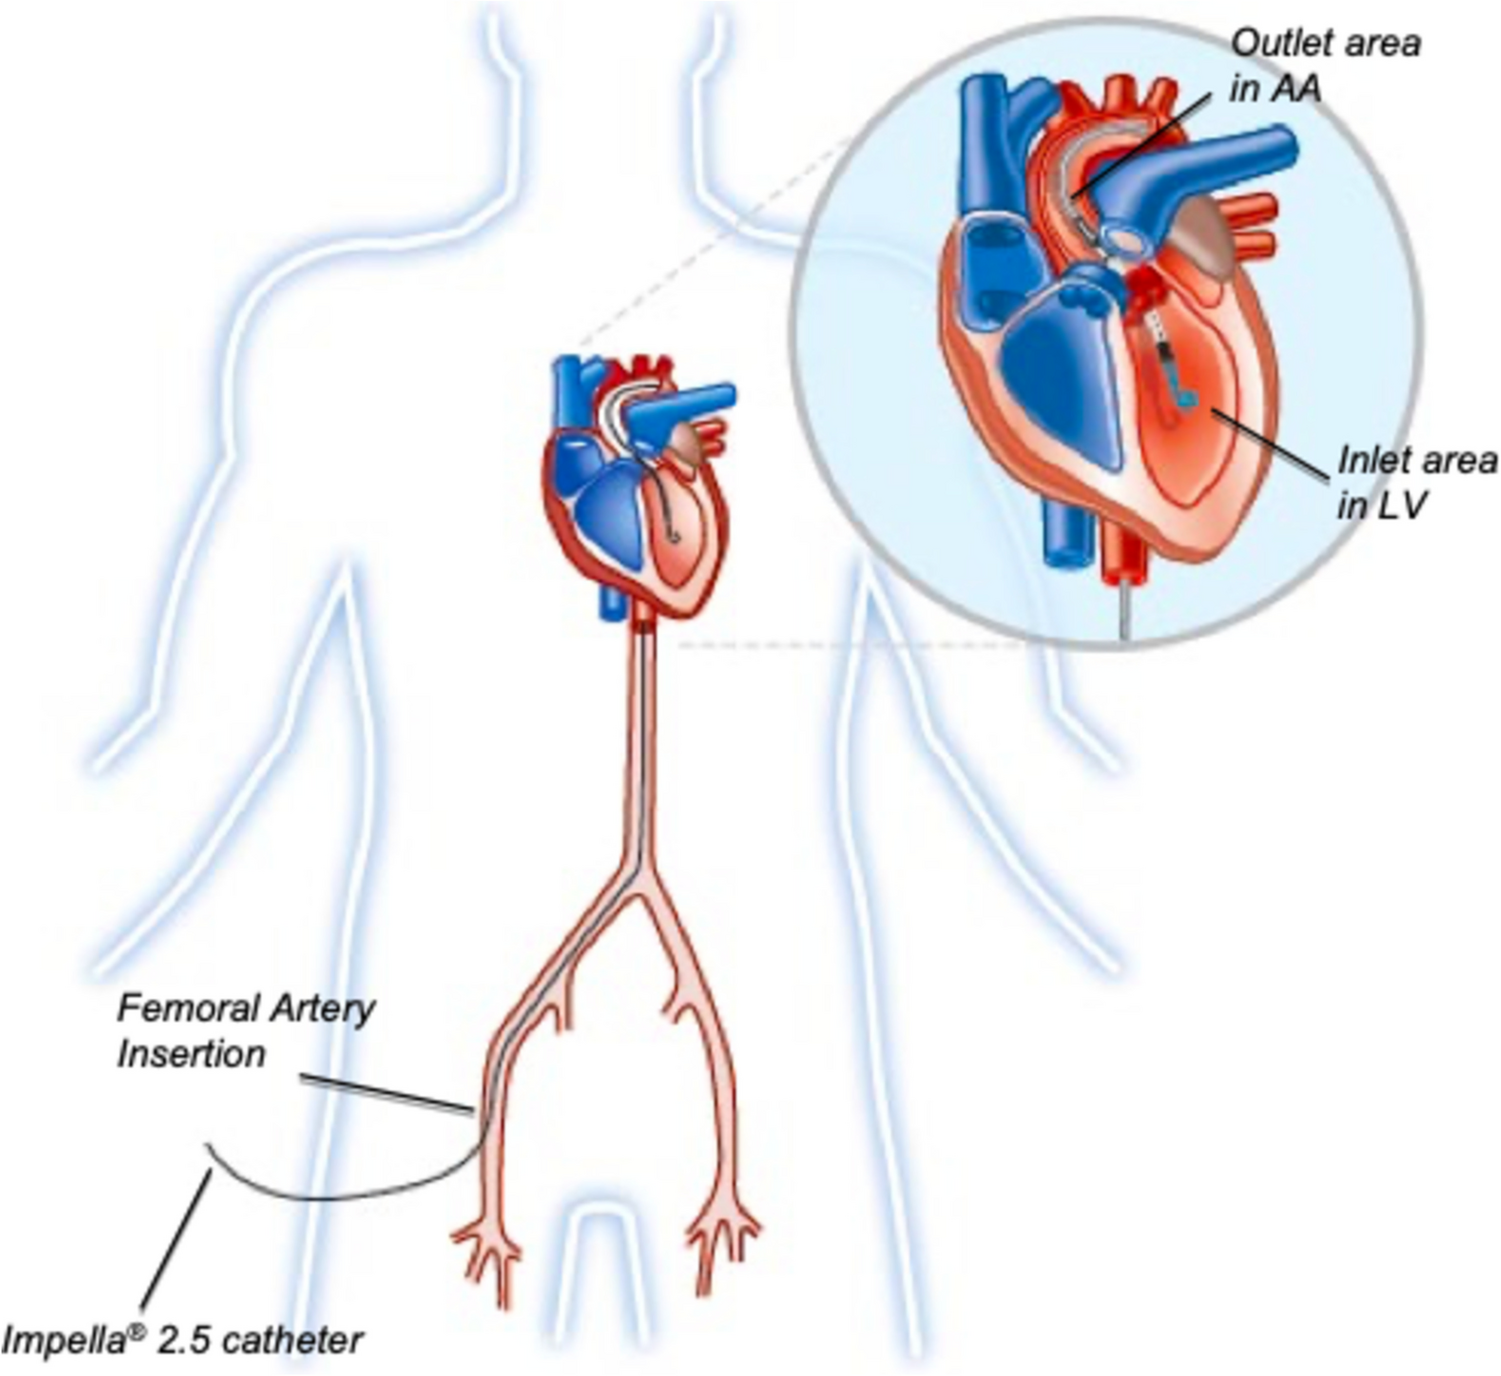 Short-Term Mechanical Circulatory Support Devices: Uses and Outcomes